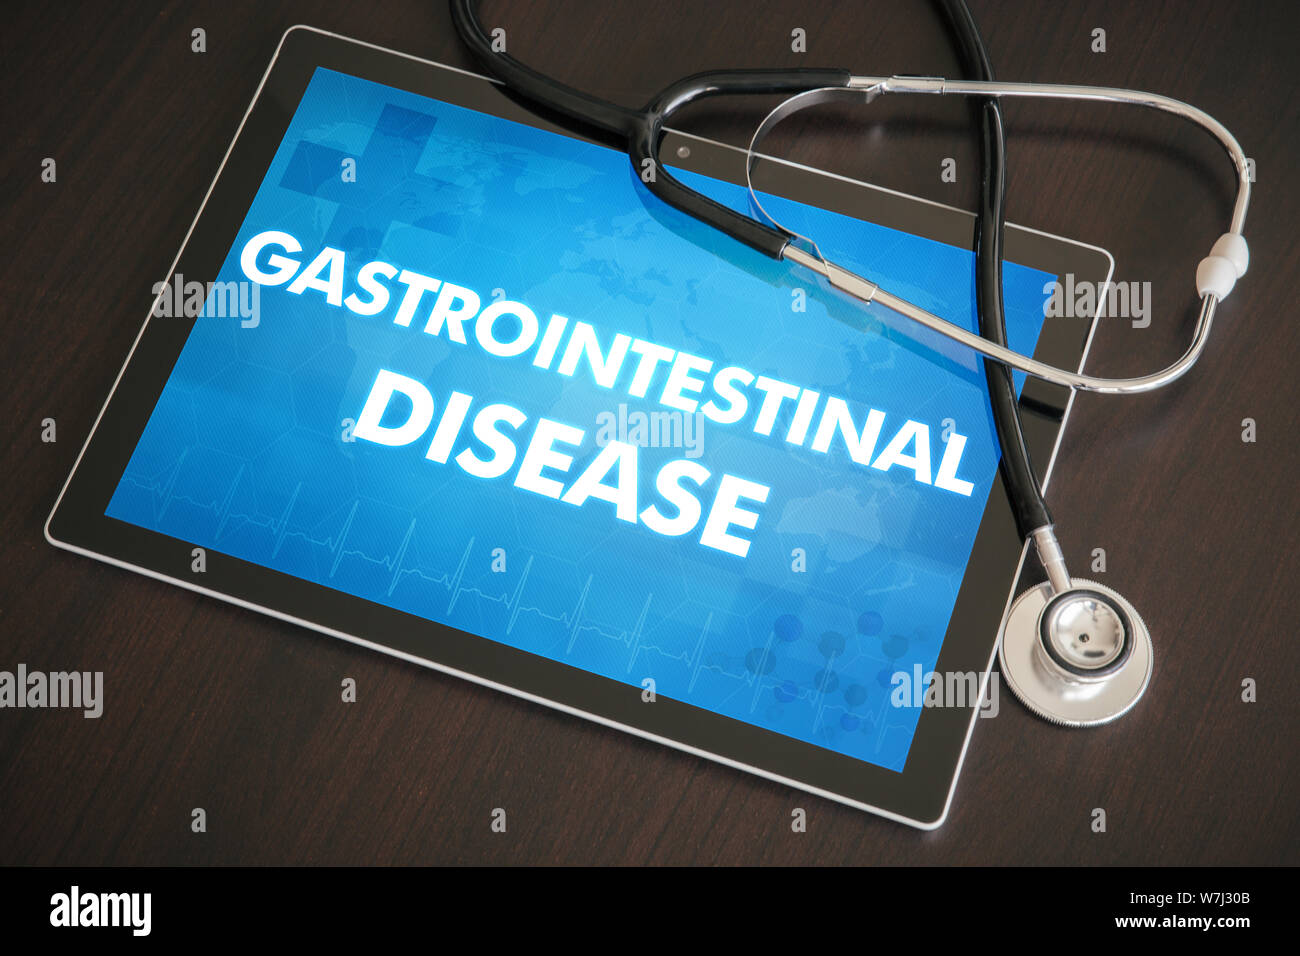 Gastrointestinal disease (stomach, tract, rectum) diagnosis medical concept on tablet screen with stethoscope. Stock Photo